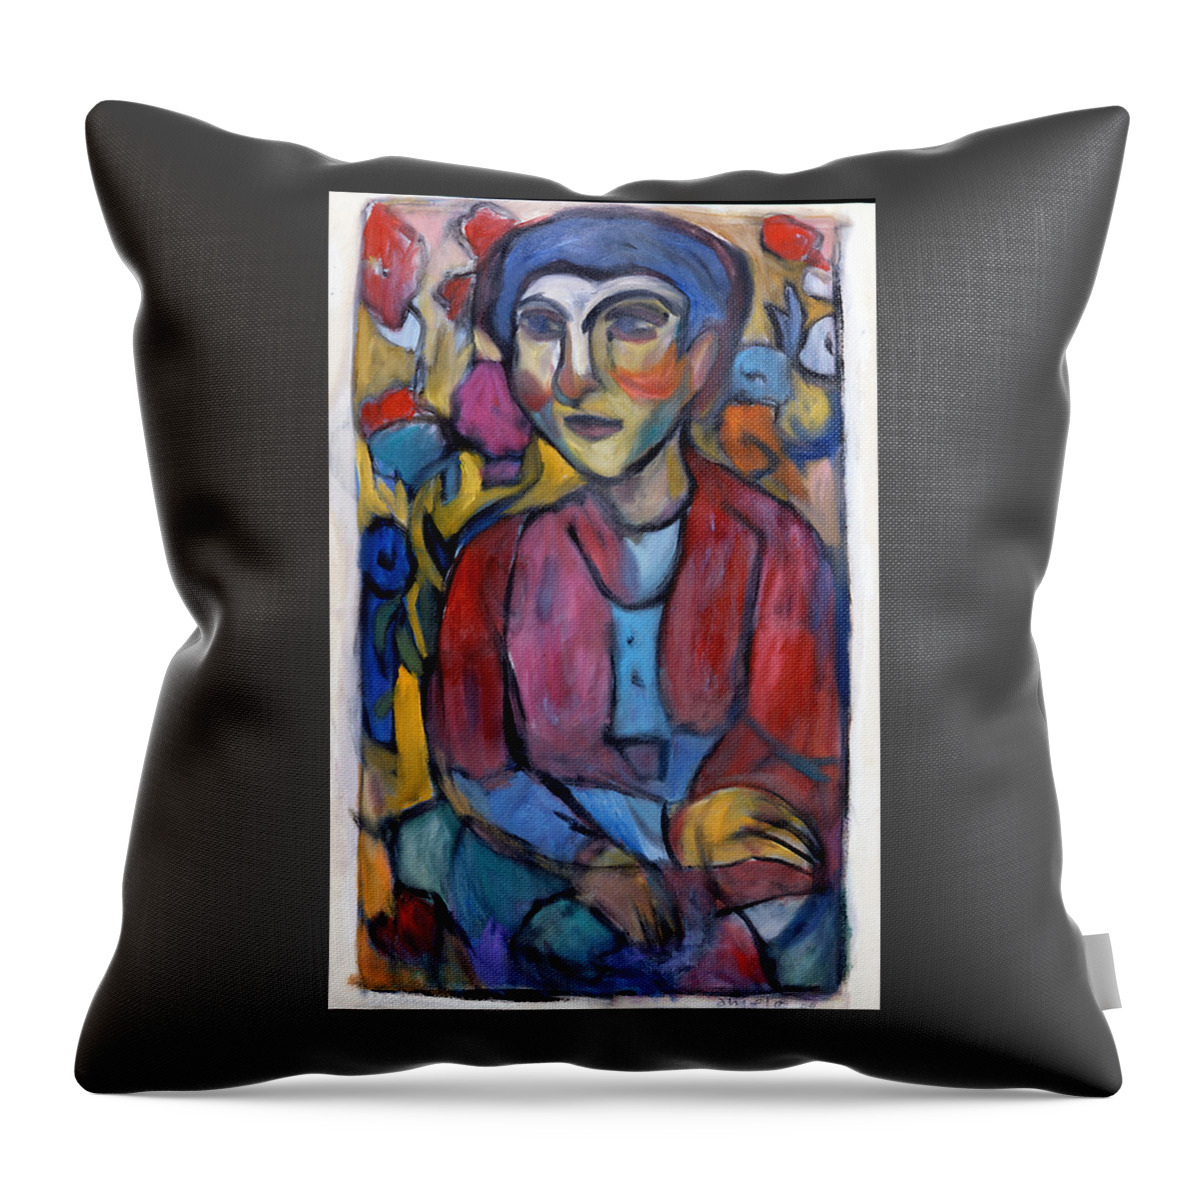 Garden Throw Pillow featuring the painting Colourful Contemple by Mykul Anjelo